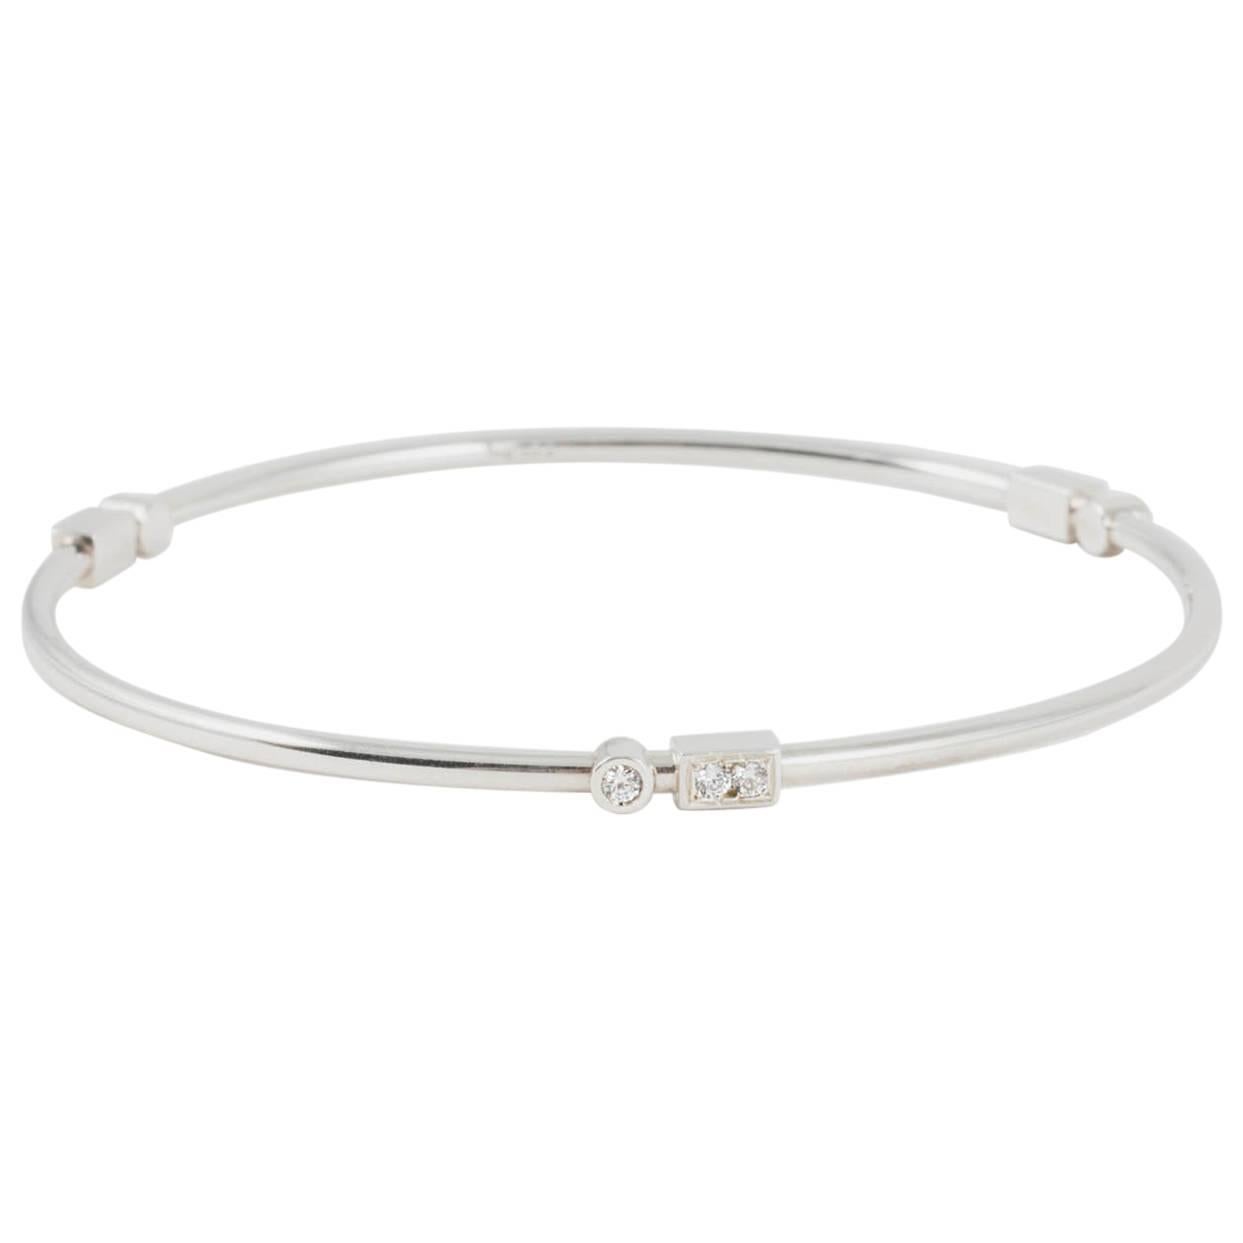 Code by Edge "A" Sterling Silver and 100% Ethical TypeIIA Diamond Bangle For Sale